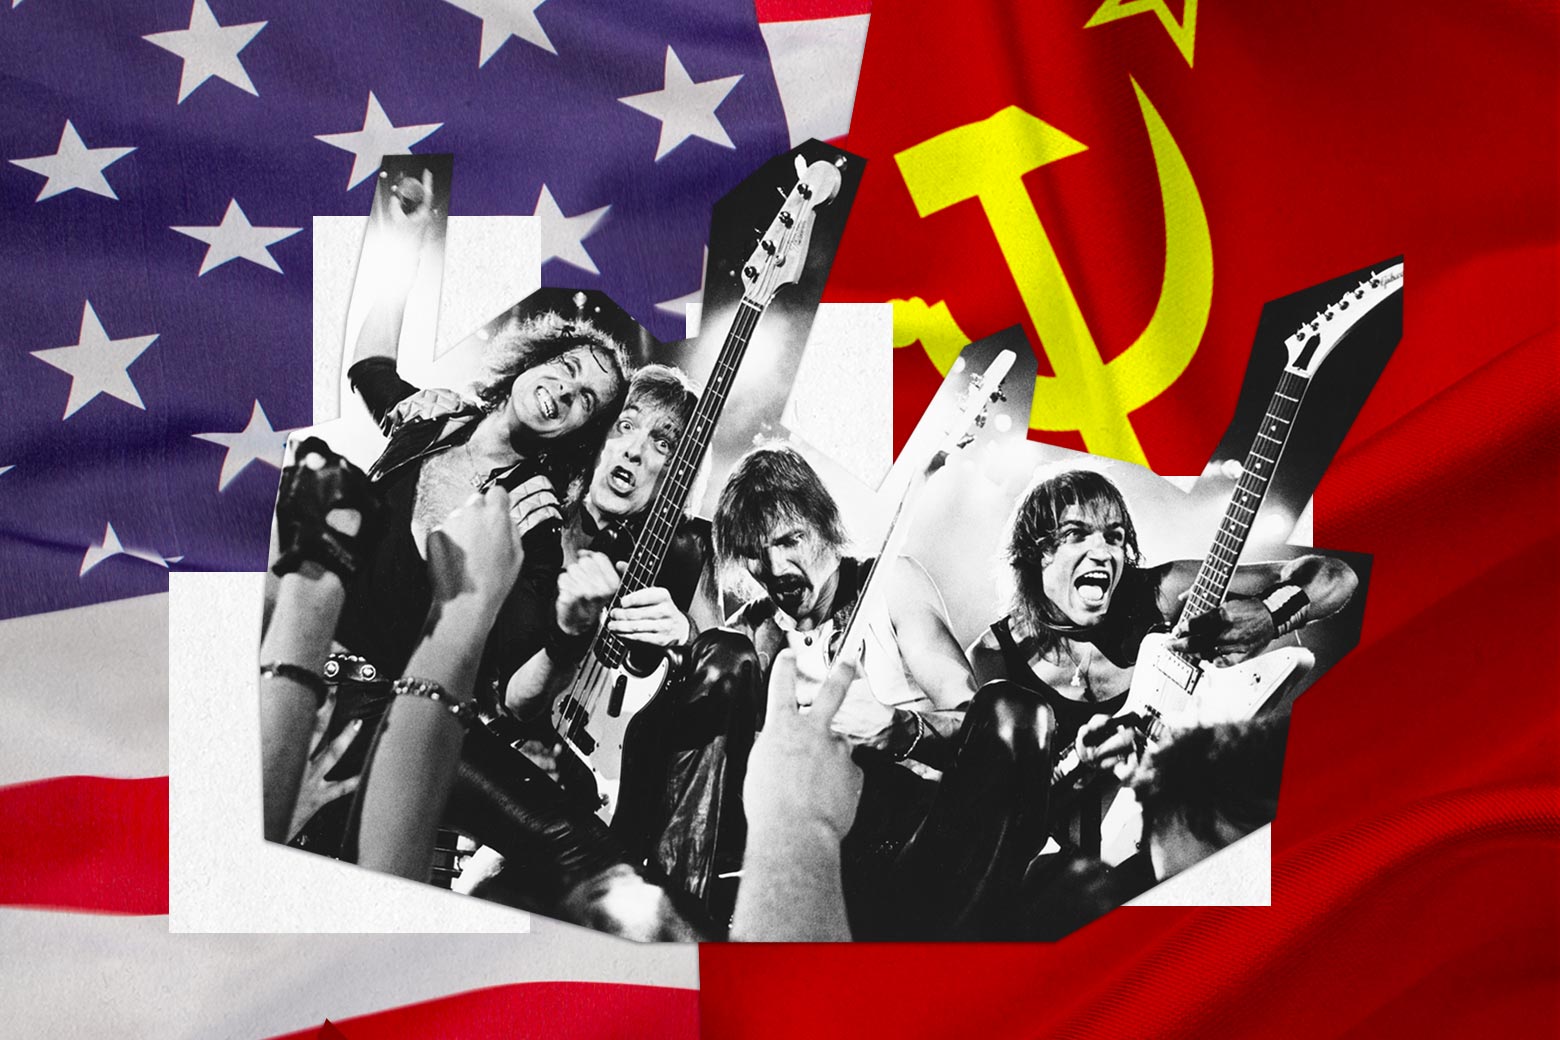 Scorpions, their many guitars raised high, backed by the dueling flags of the U.S. and the USSR.